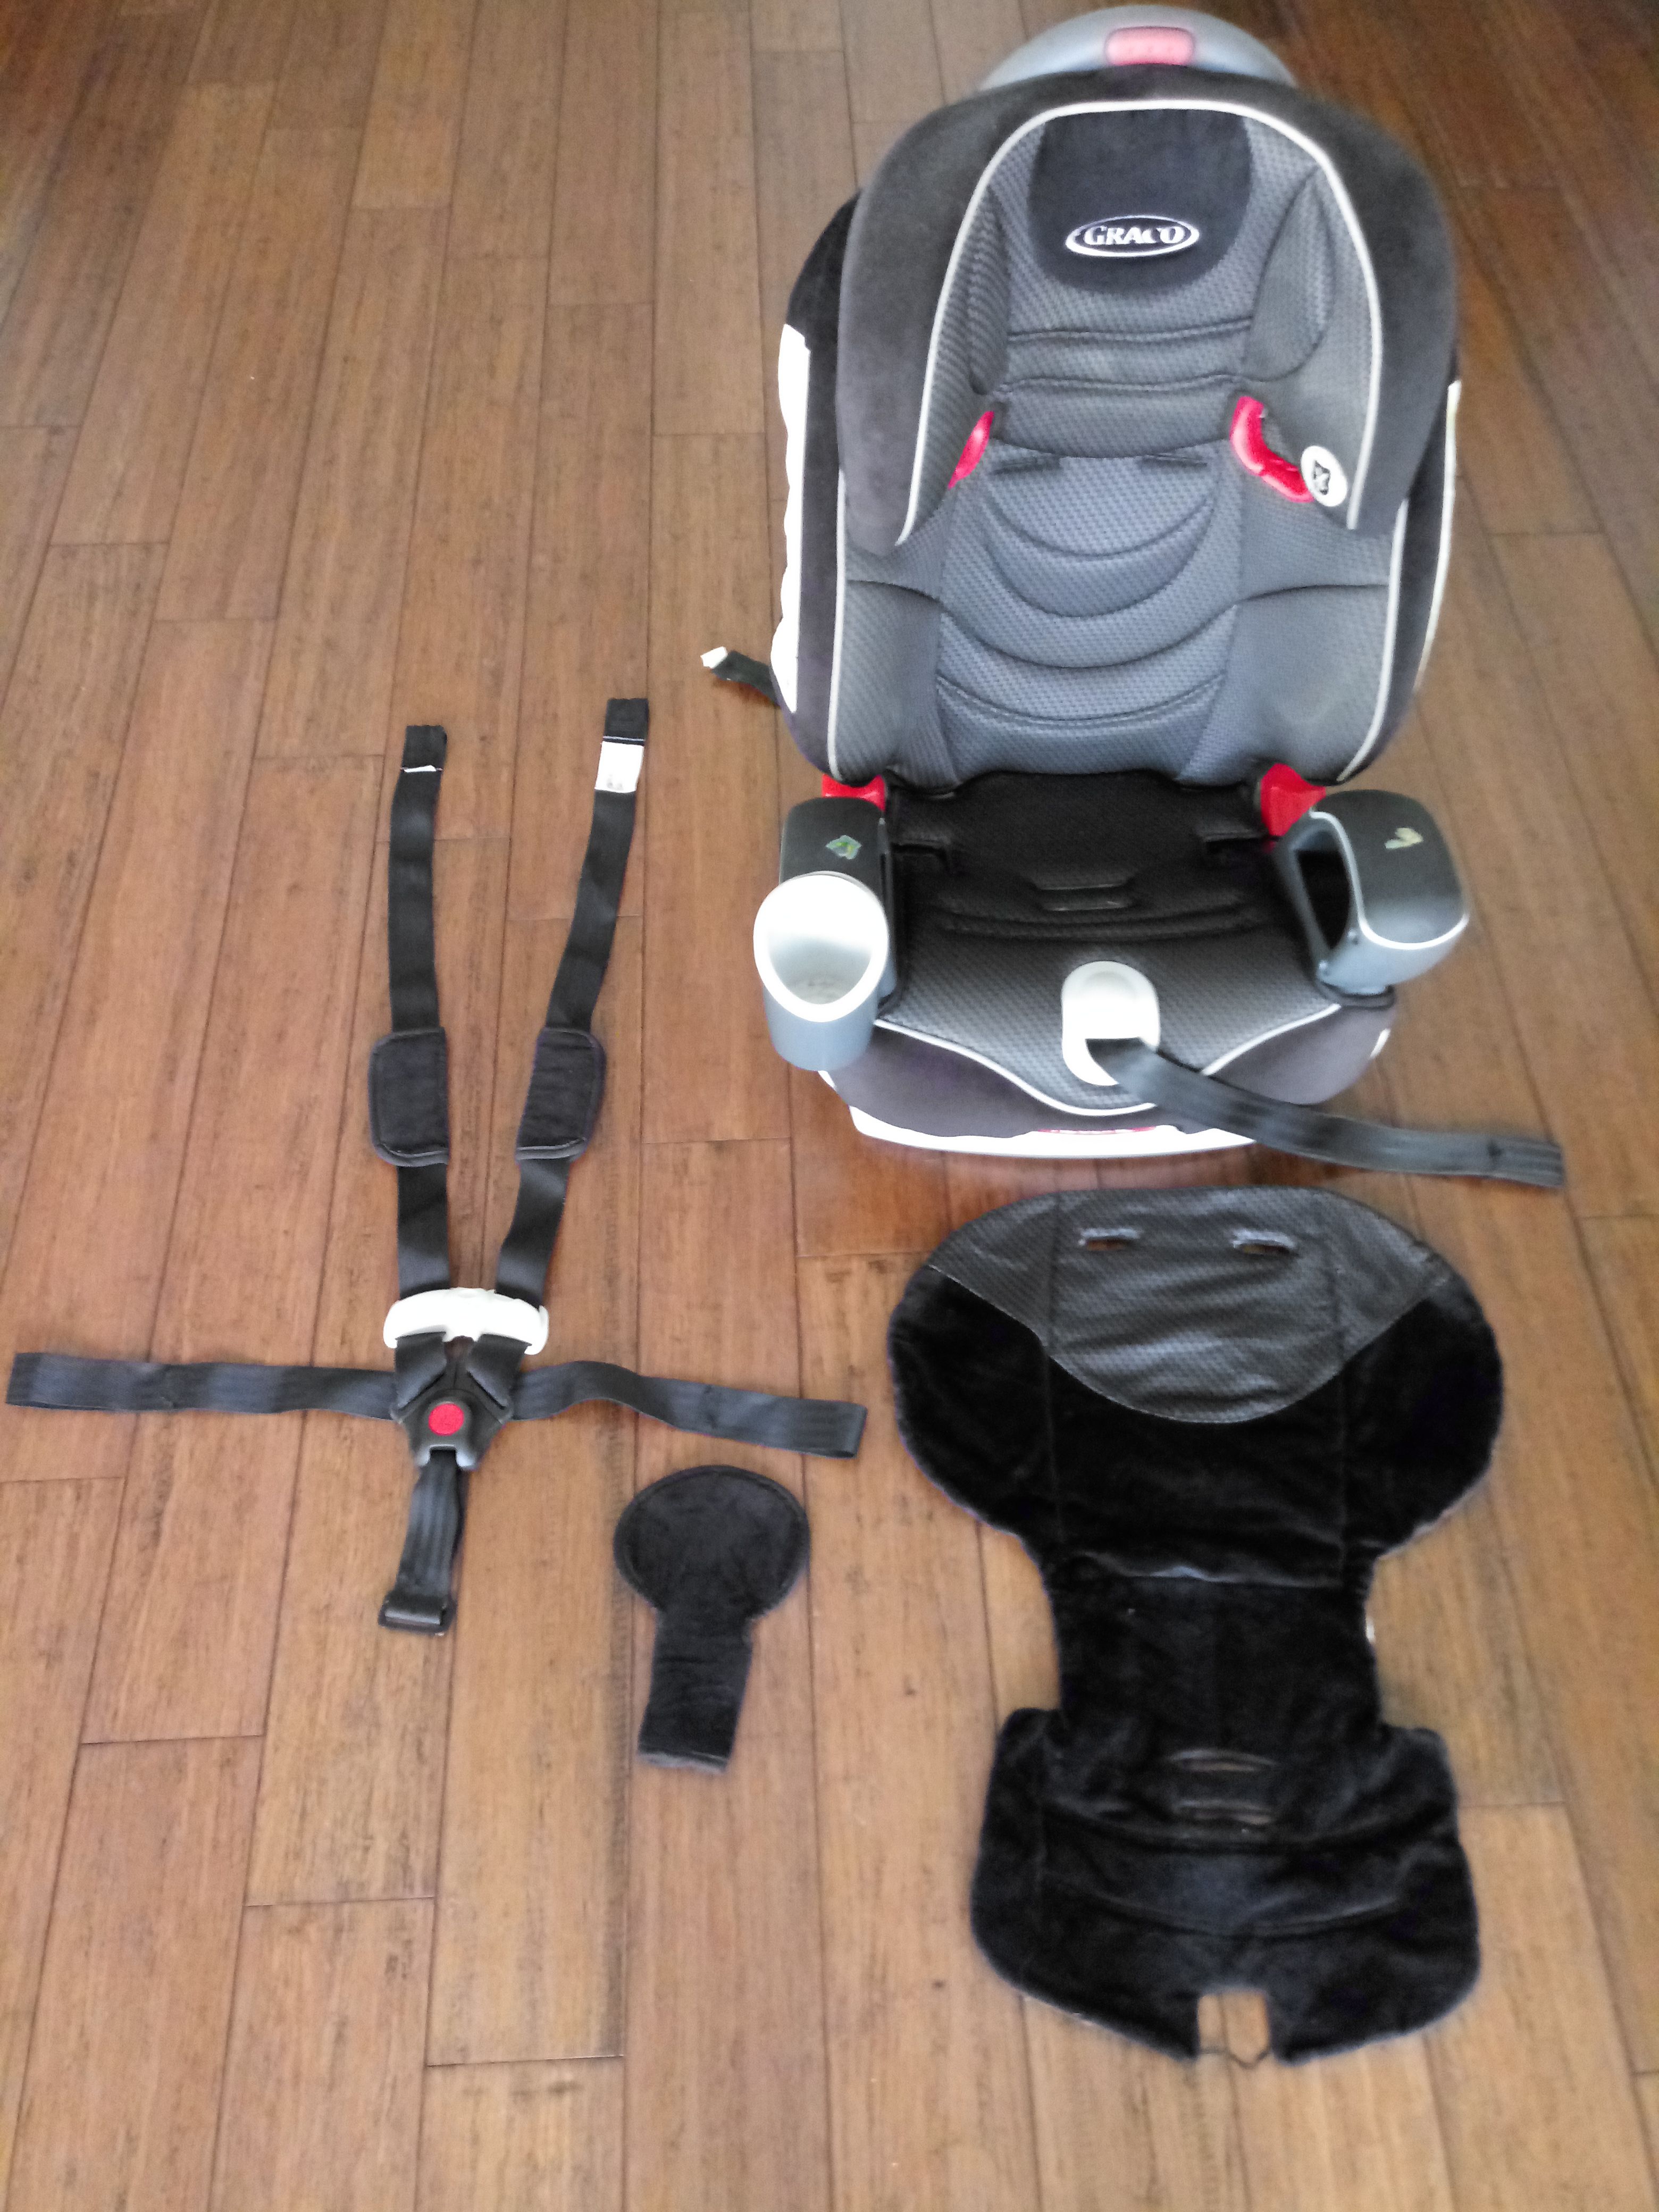 Graco Nautilus 65 LX 3 in 1 Harness Booster Car Seat, carseat safeseat (We Bought it for $170)